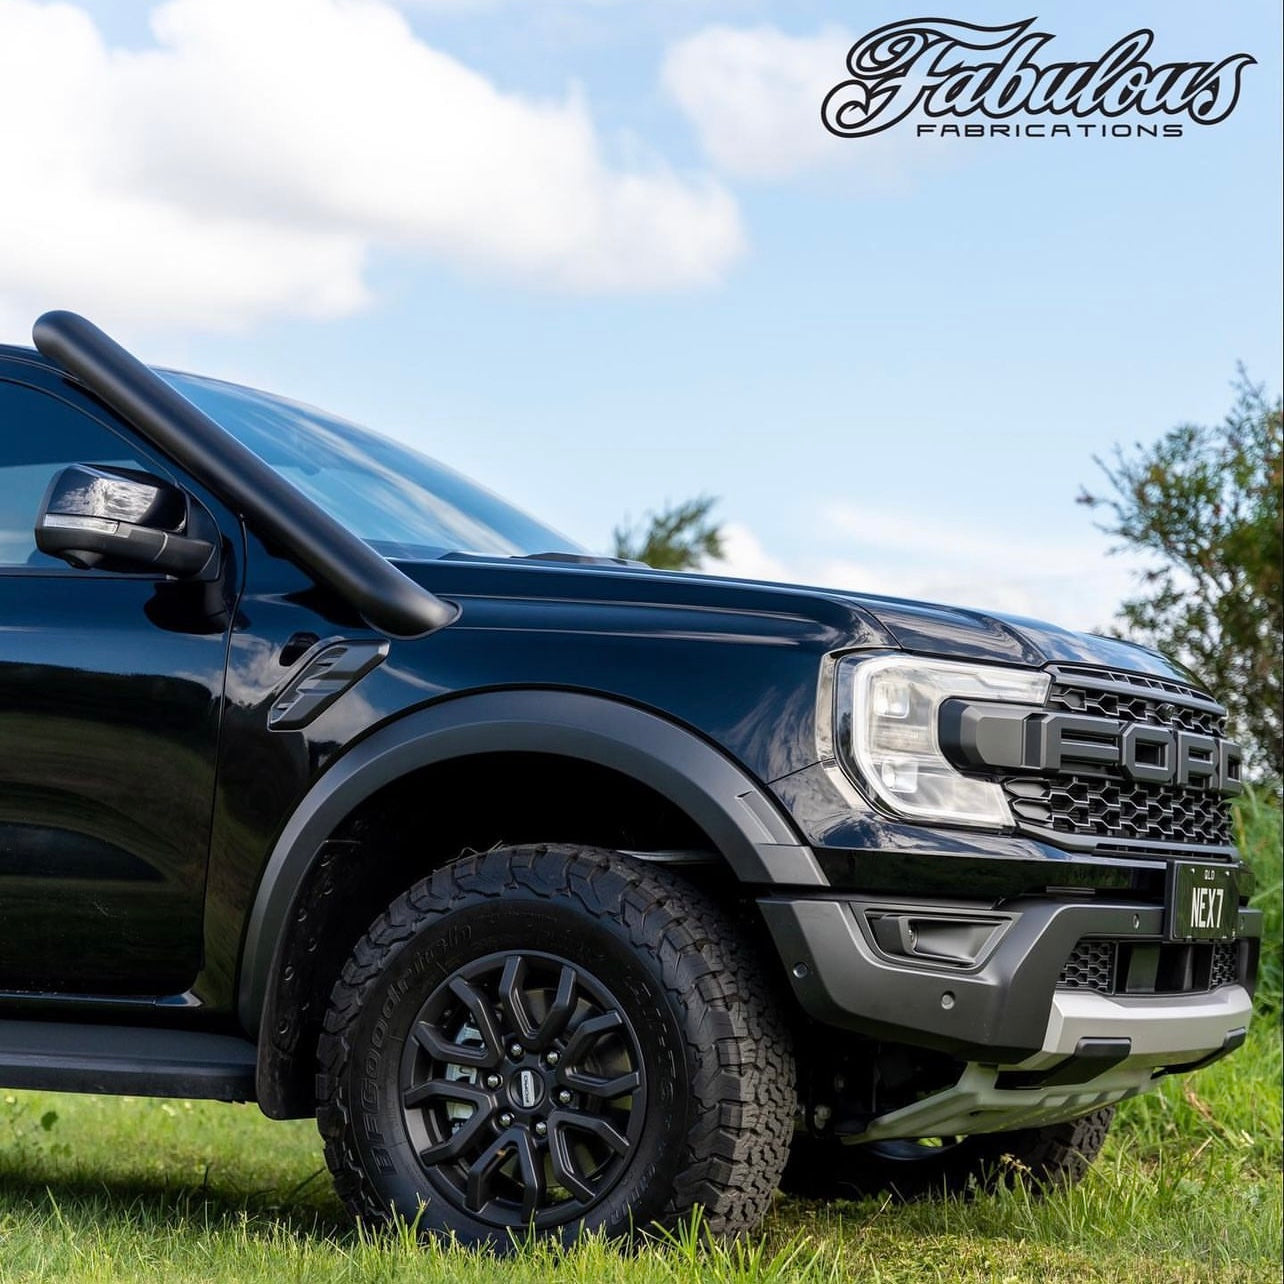 Ford Ranger Raptor Next Gen 4 Inch Stainless Snorkel and Twin Intake Alloy Airbox Kit